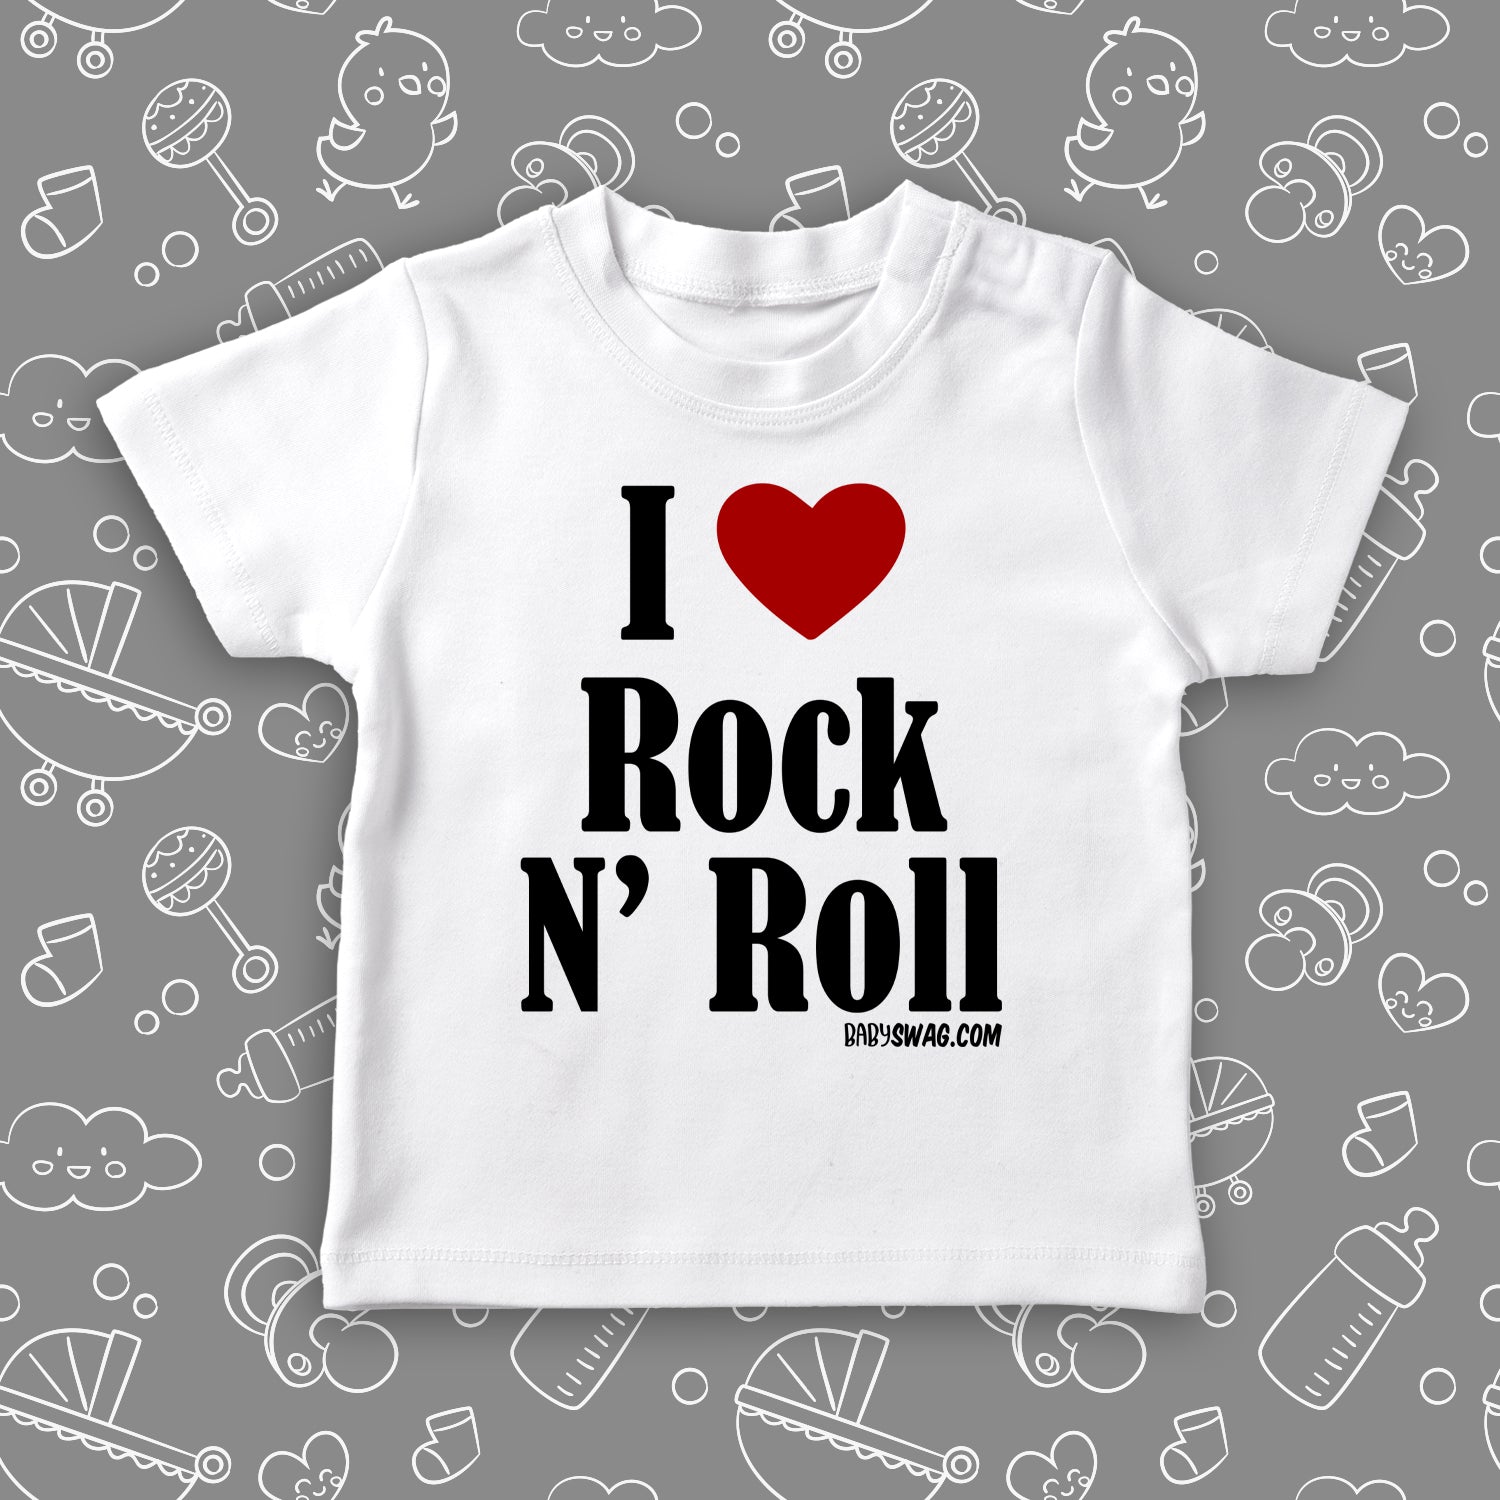 Toddler shirts with saying "I Love Rock And Roll" in white.